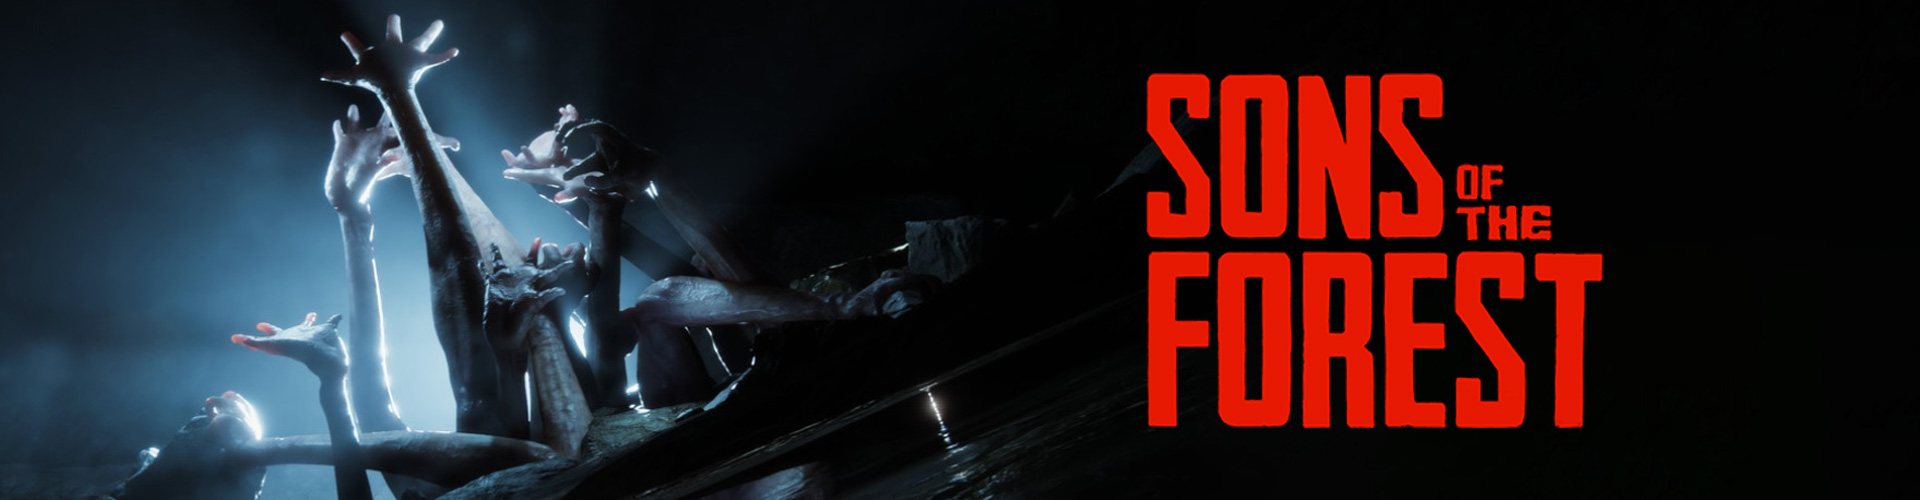 Sons of the Forest e un gioco survival horror multiplayer online